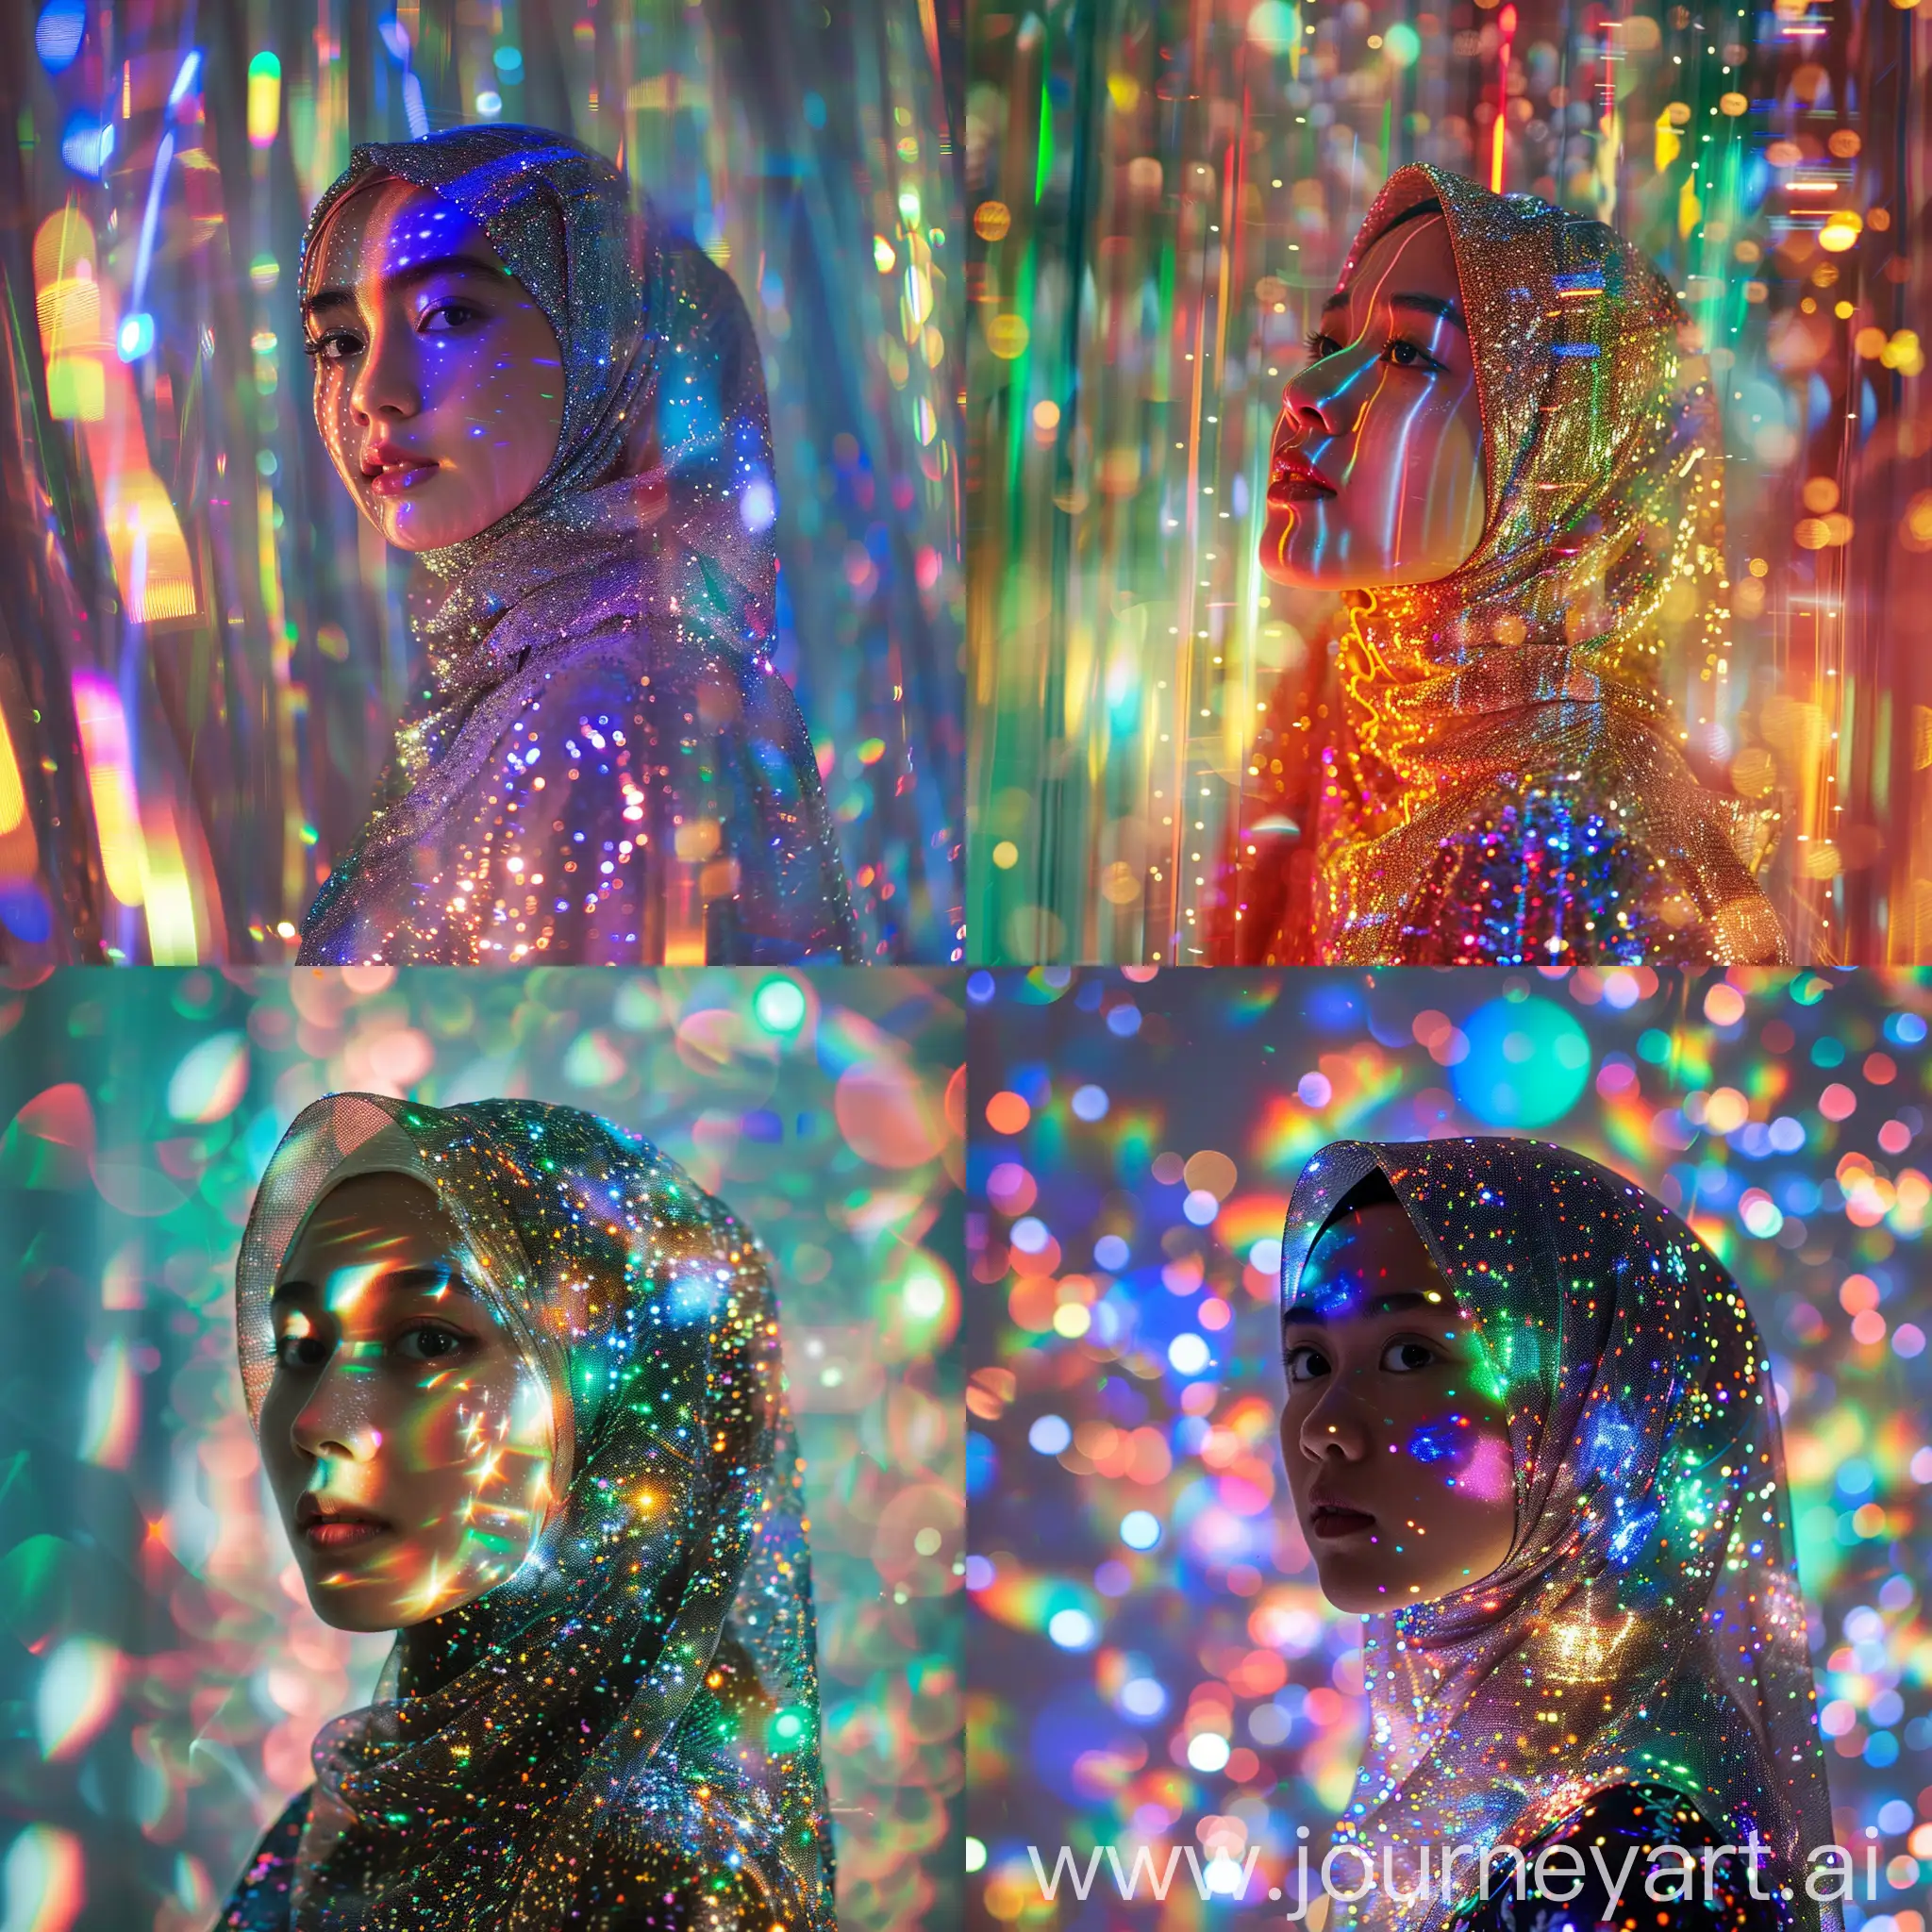 a young hijab woman Indonesia face illuminated by sparkling lights, stand and strike a pose, set against a holographic, shimmering, glittery rainbowcore background, captured with double exposure photography to create a psychedelic, cinematic beauty